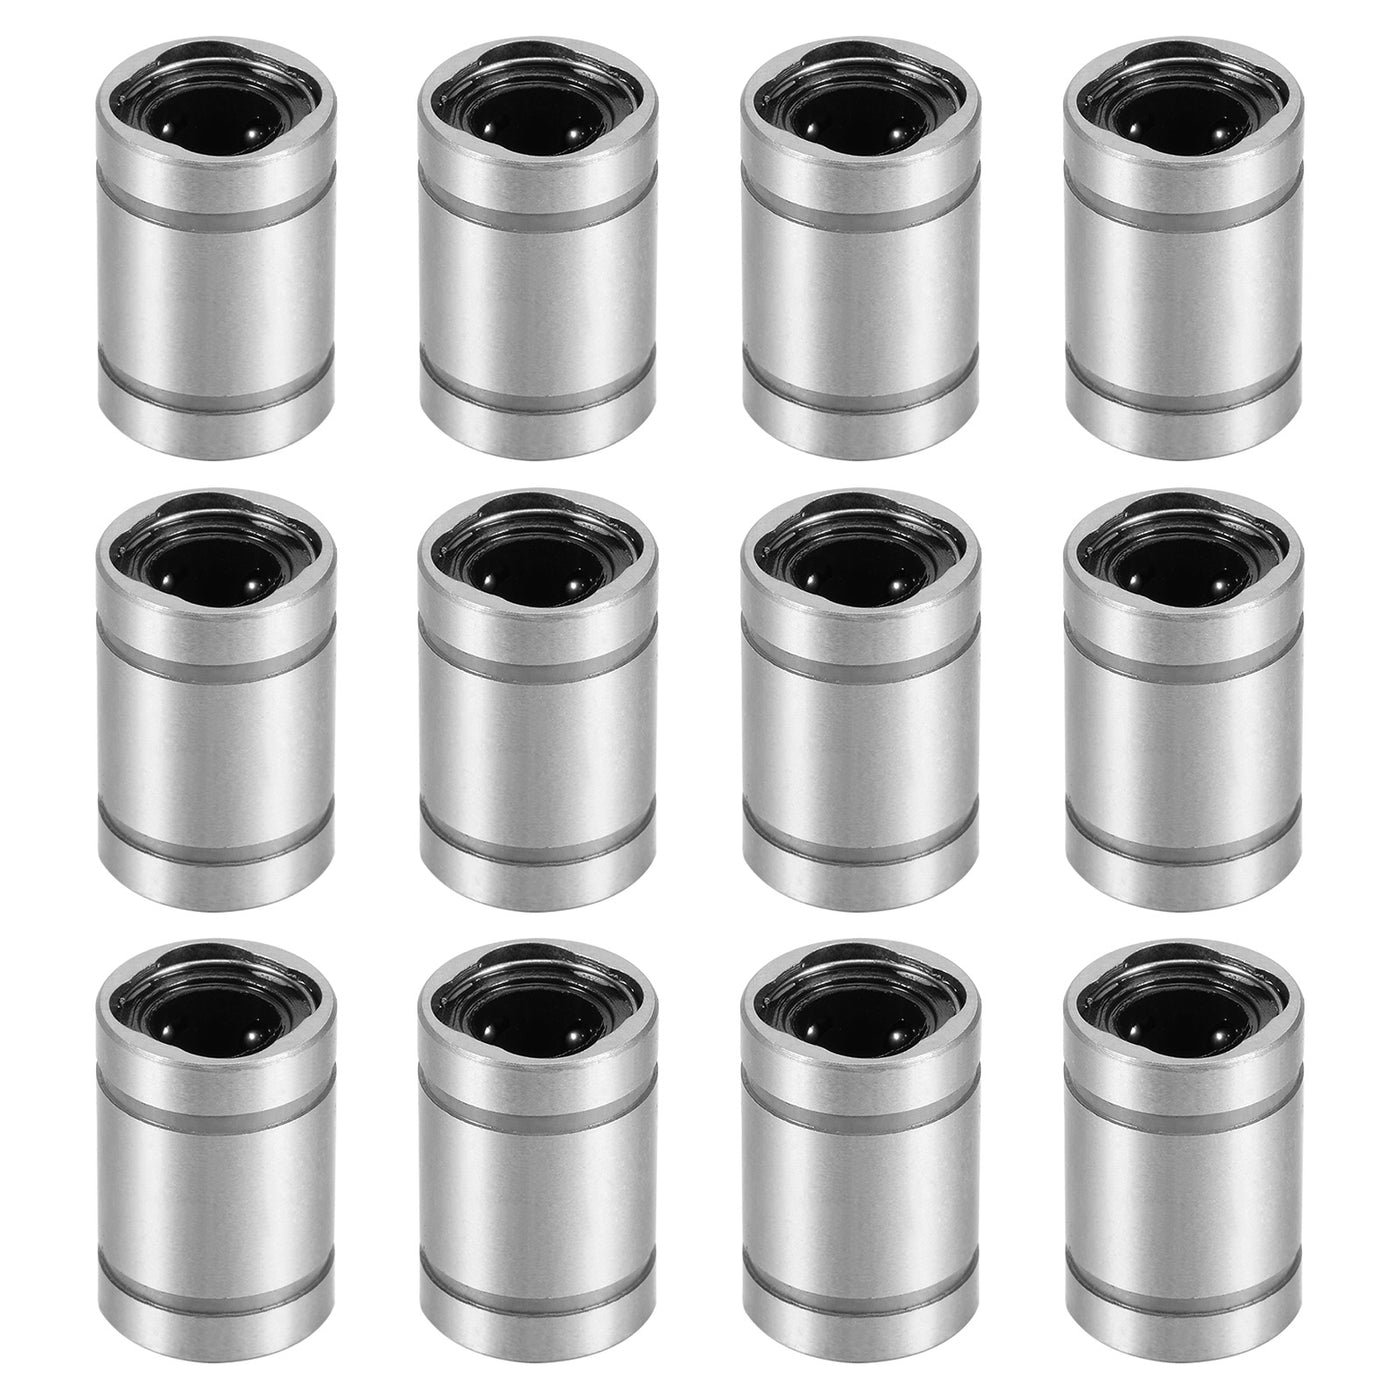 uxcell Uxcell 12pcs LM5UU Linear Ball Bearings, 5mm Bore 10mm OD 15mm Long Linear Bearing for CNC, 3D Printer